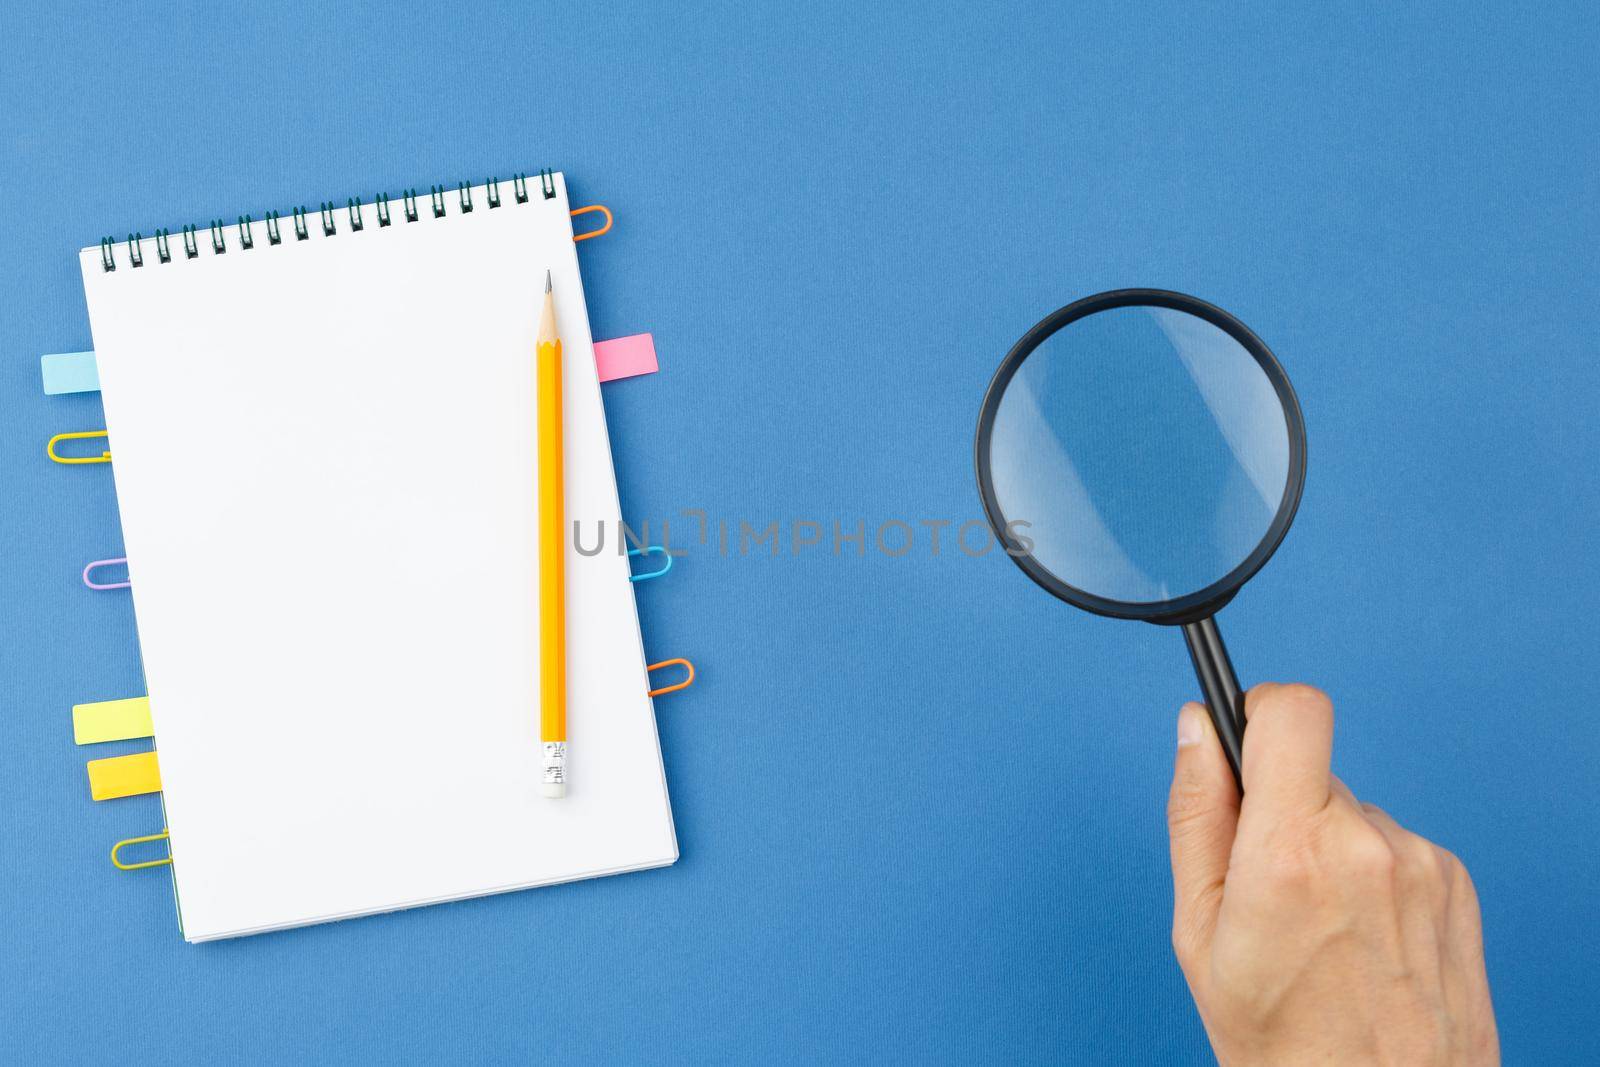 Spiral notebook with bookmarks from paper clips, note sheets, pencil, magnifying glass in hand on blue isolated background. Office concept. Top view.